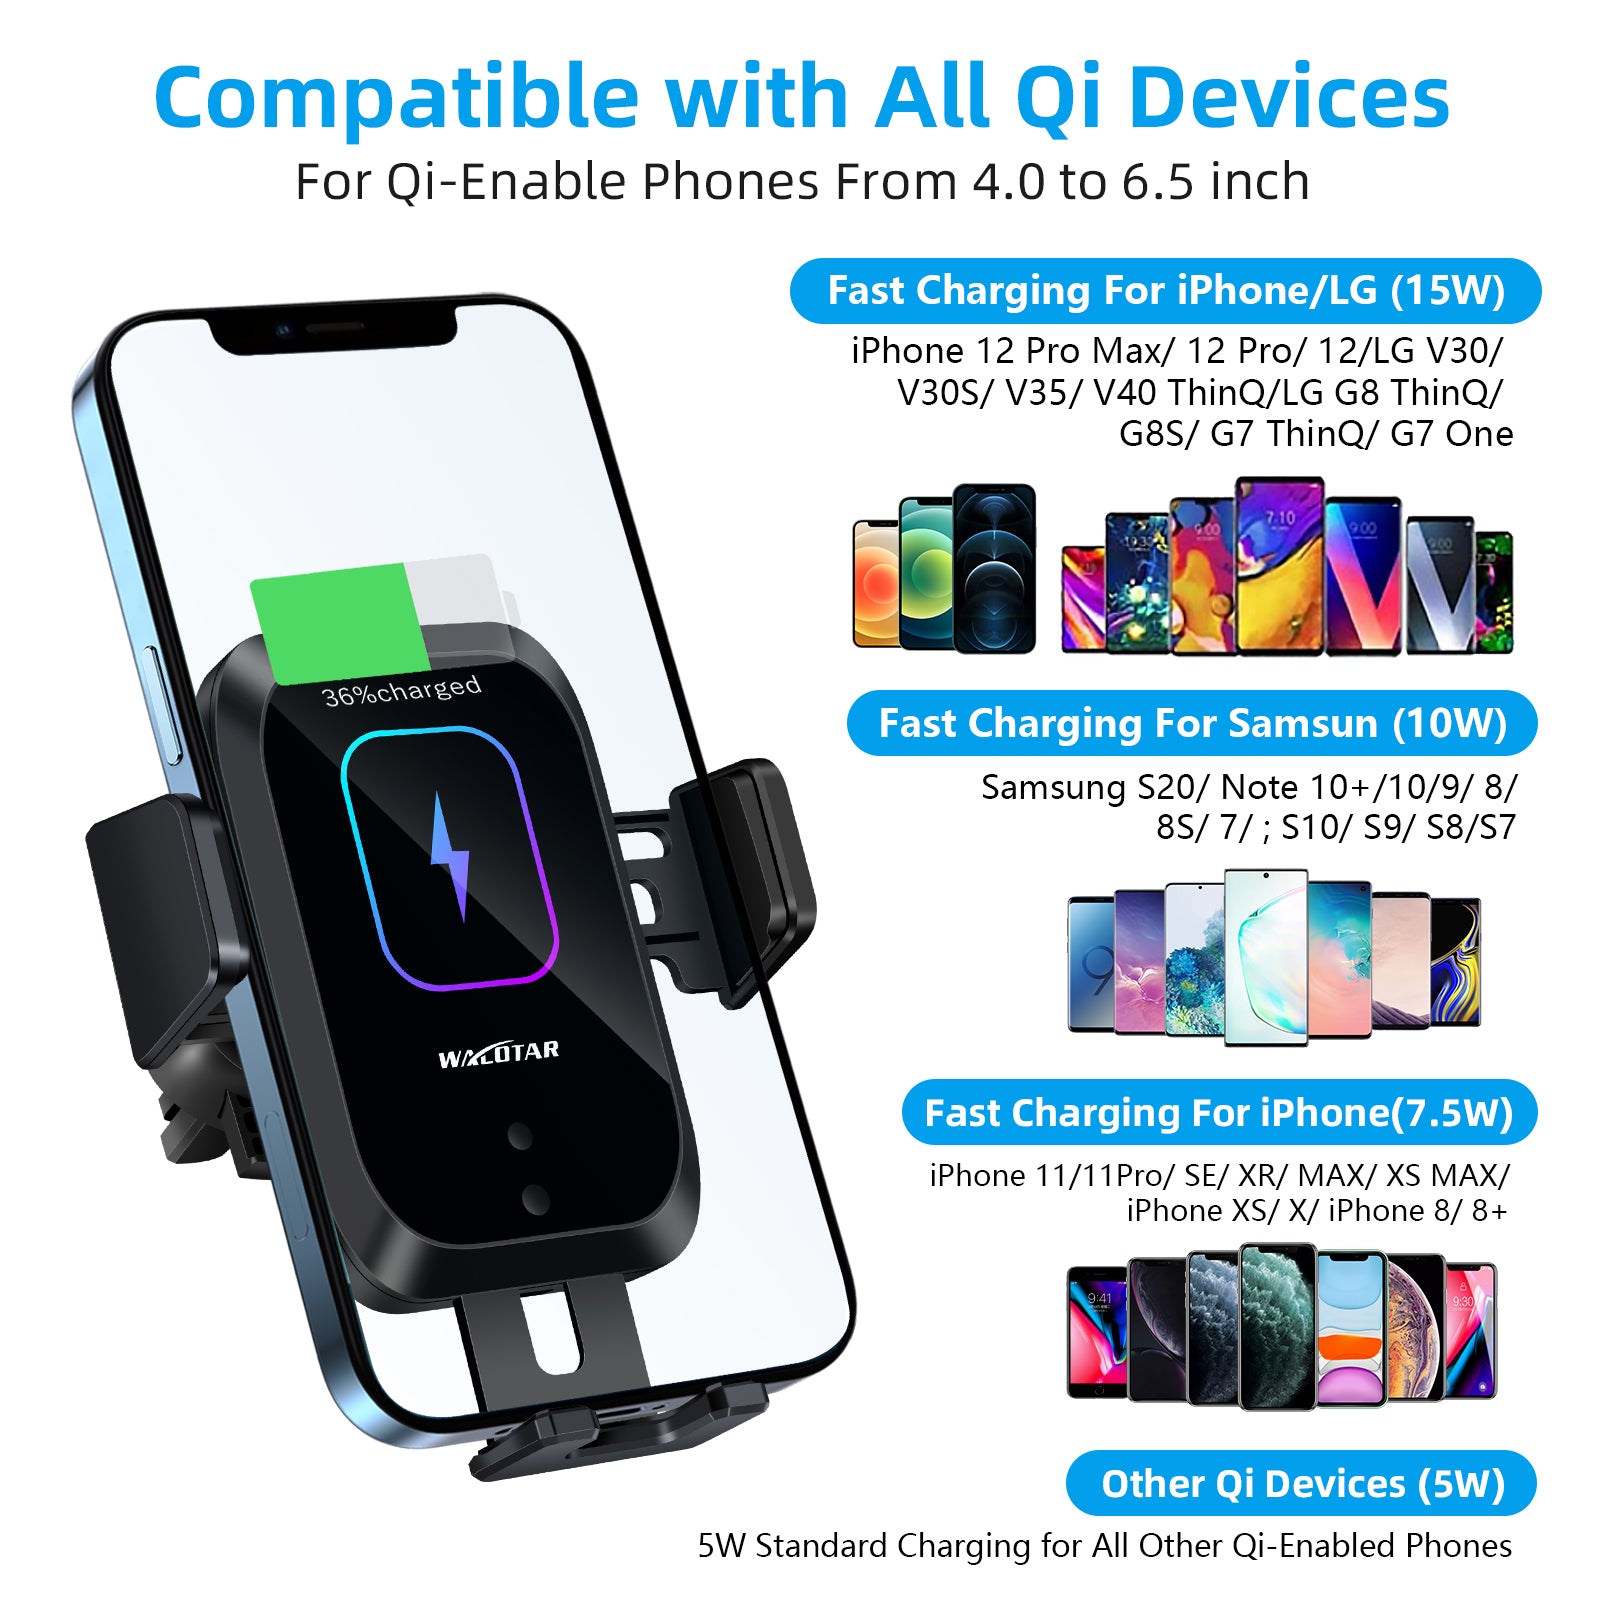 HVDI Wireless Car Charger Mount,Car Cigarette Lighter 15W Qi Fast Charging Auto-Clamping Dual QC 3.0 Port Air Vent Car Charger Phone Holder,for iPhone 12 Pro Max/11 Pro Max/XR/X/8,Samsung S20/S10/9/8